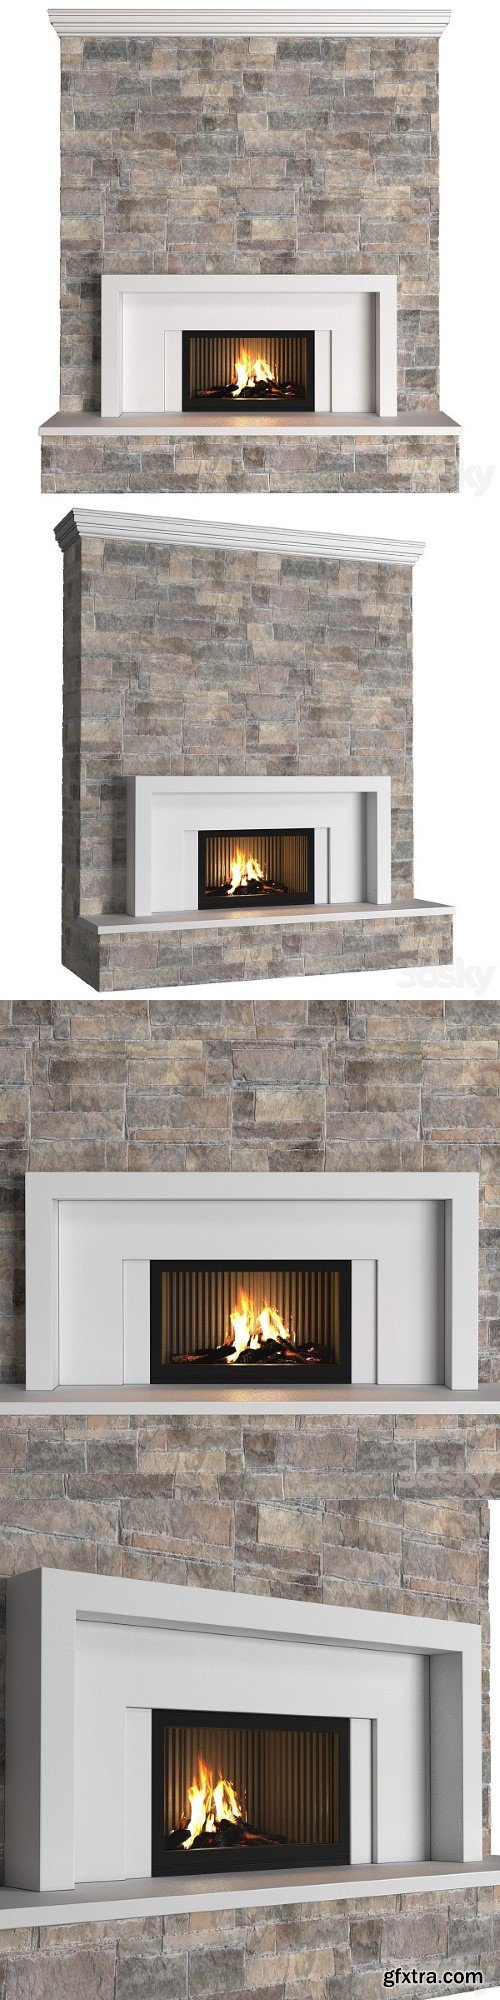 Classic Style Fireplace With Stone Wall